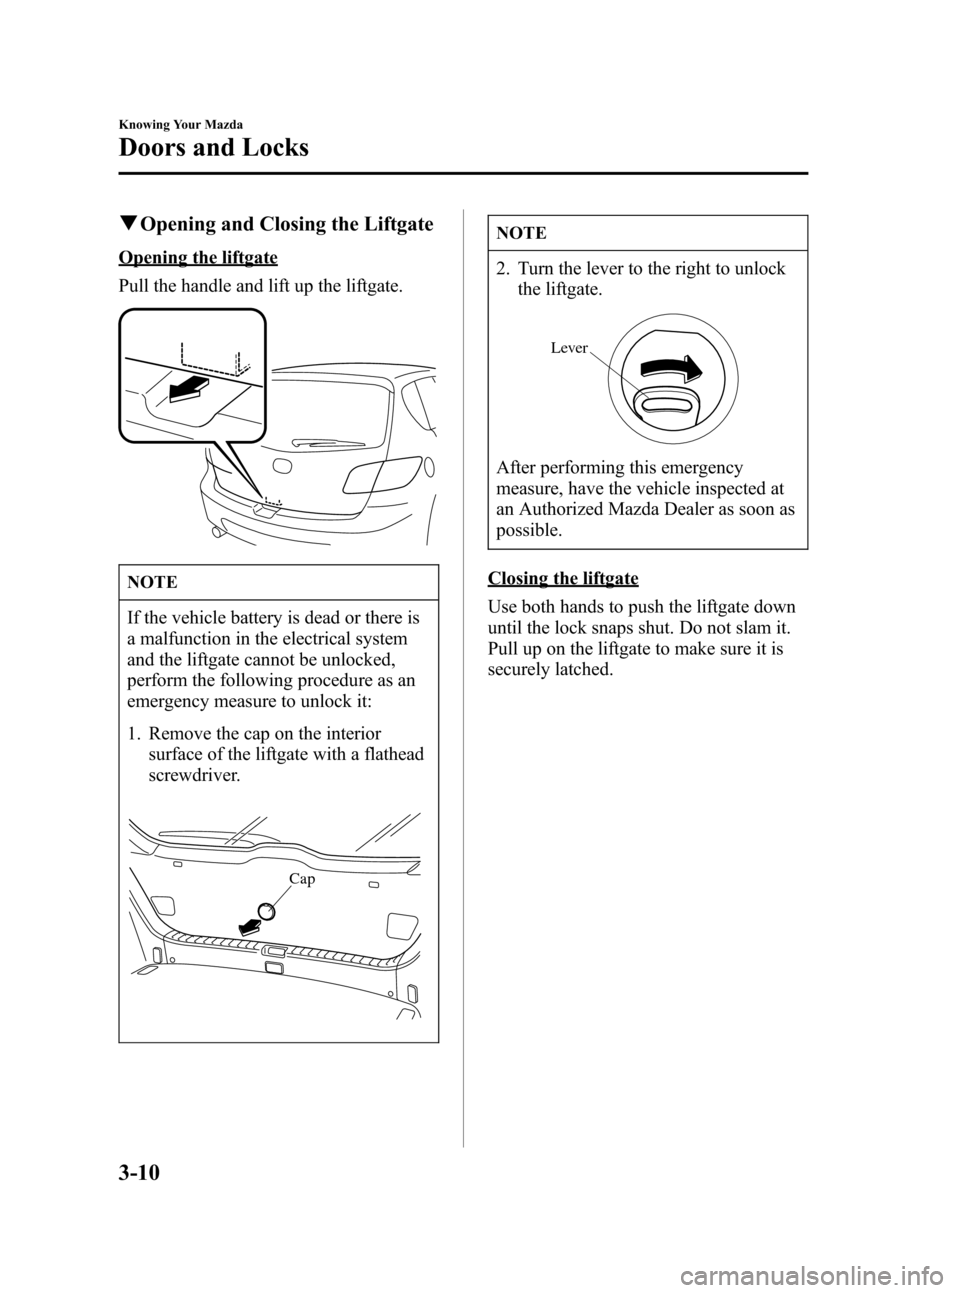 MAZDA MODEL 3 HATCHBACK 2006  Owners Manual (in English) Black plate (80,1)
qOpening and Closing the Liftgate
Opening the liftgate
Pull the handle and lift up the liftgate.
NOTE
If the vehicle battery is dead or there is
a malfunction in the electrical syst